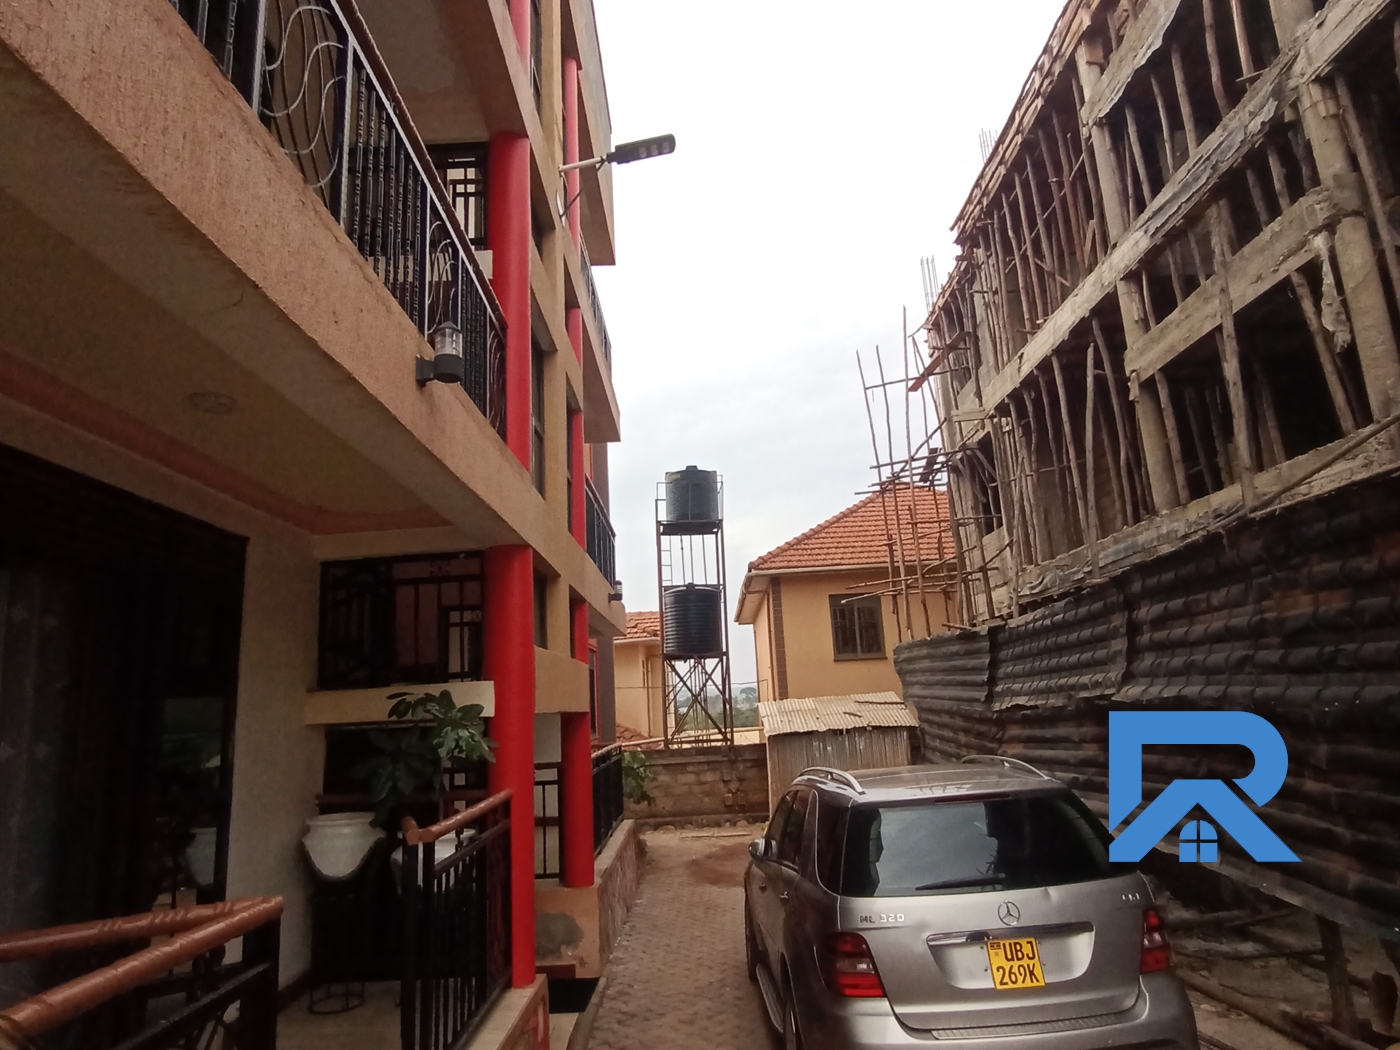 Apartment for rent in Lweza Kampala